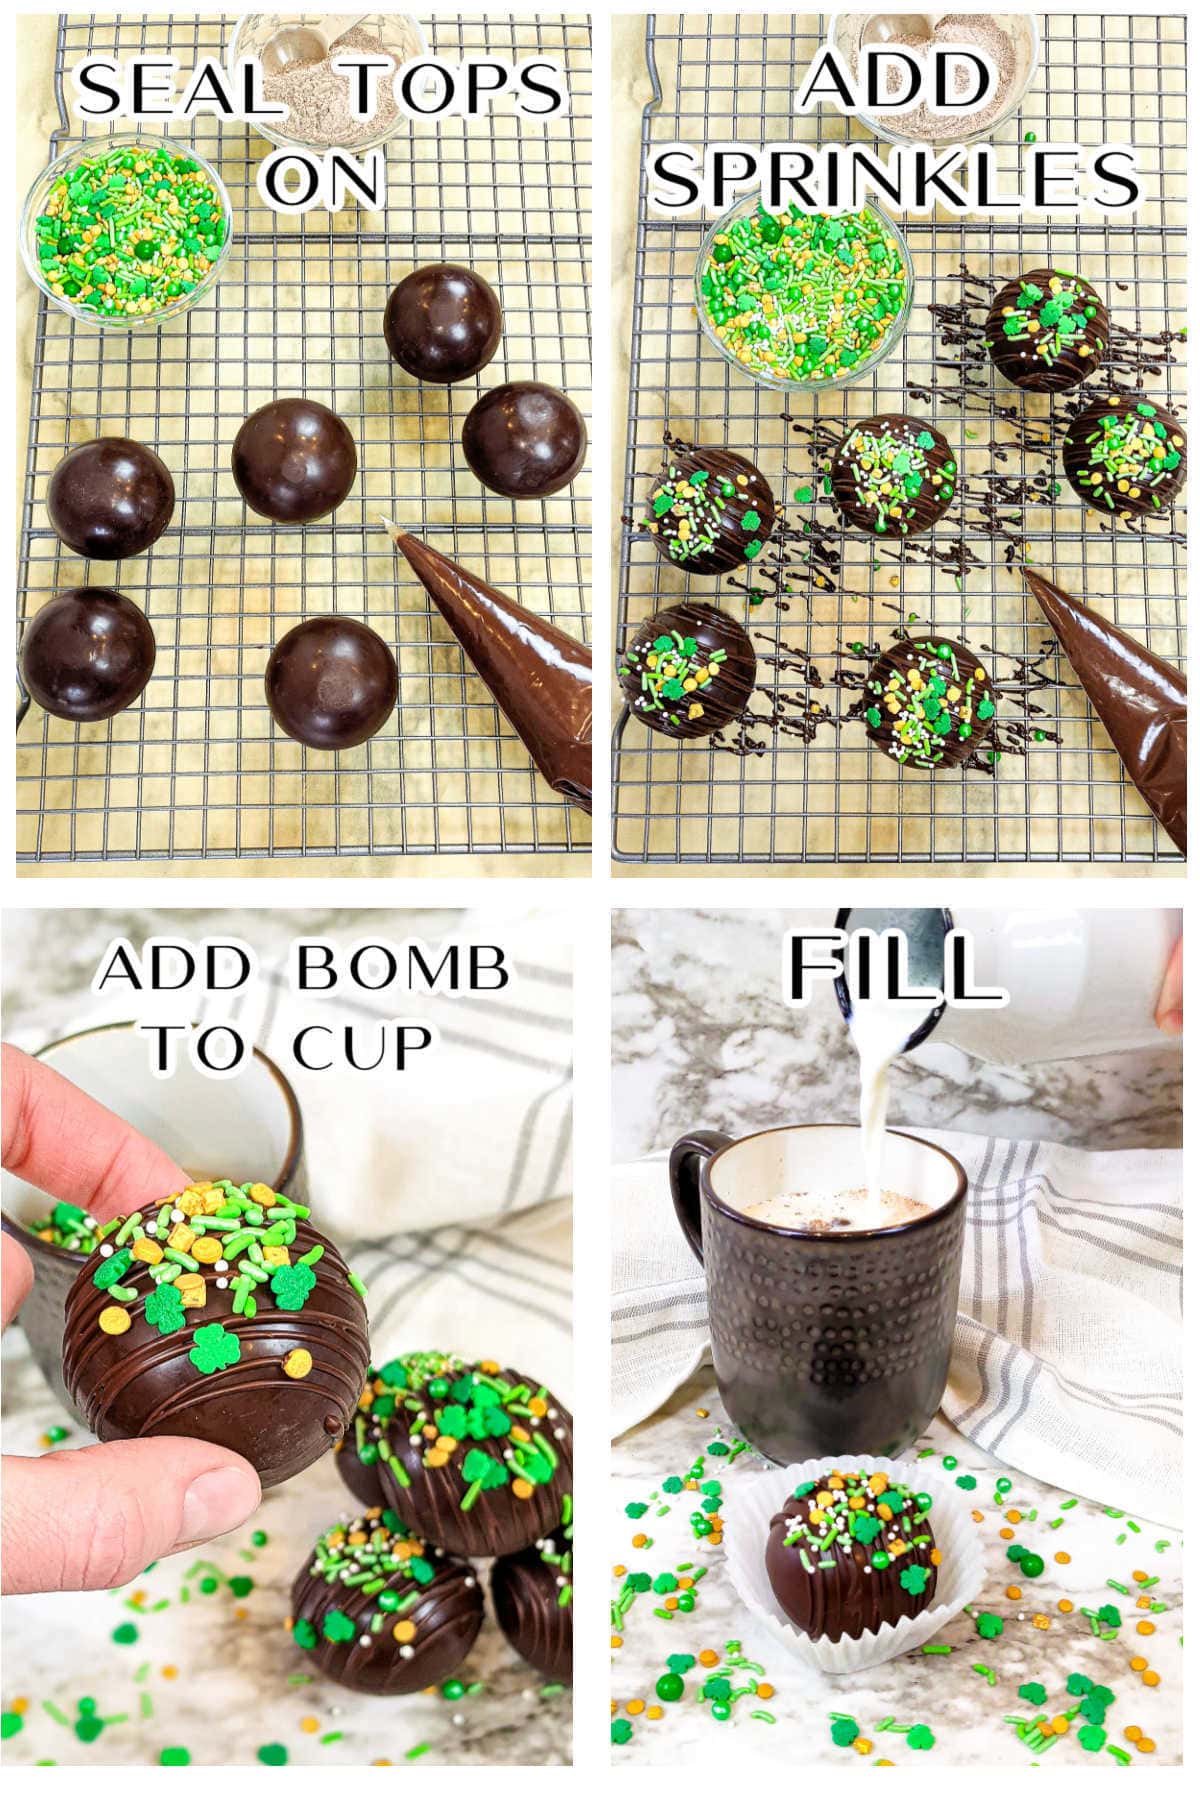 Step by step images for decorating hot chocolate bombs.